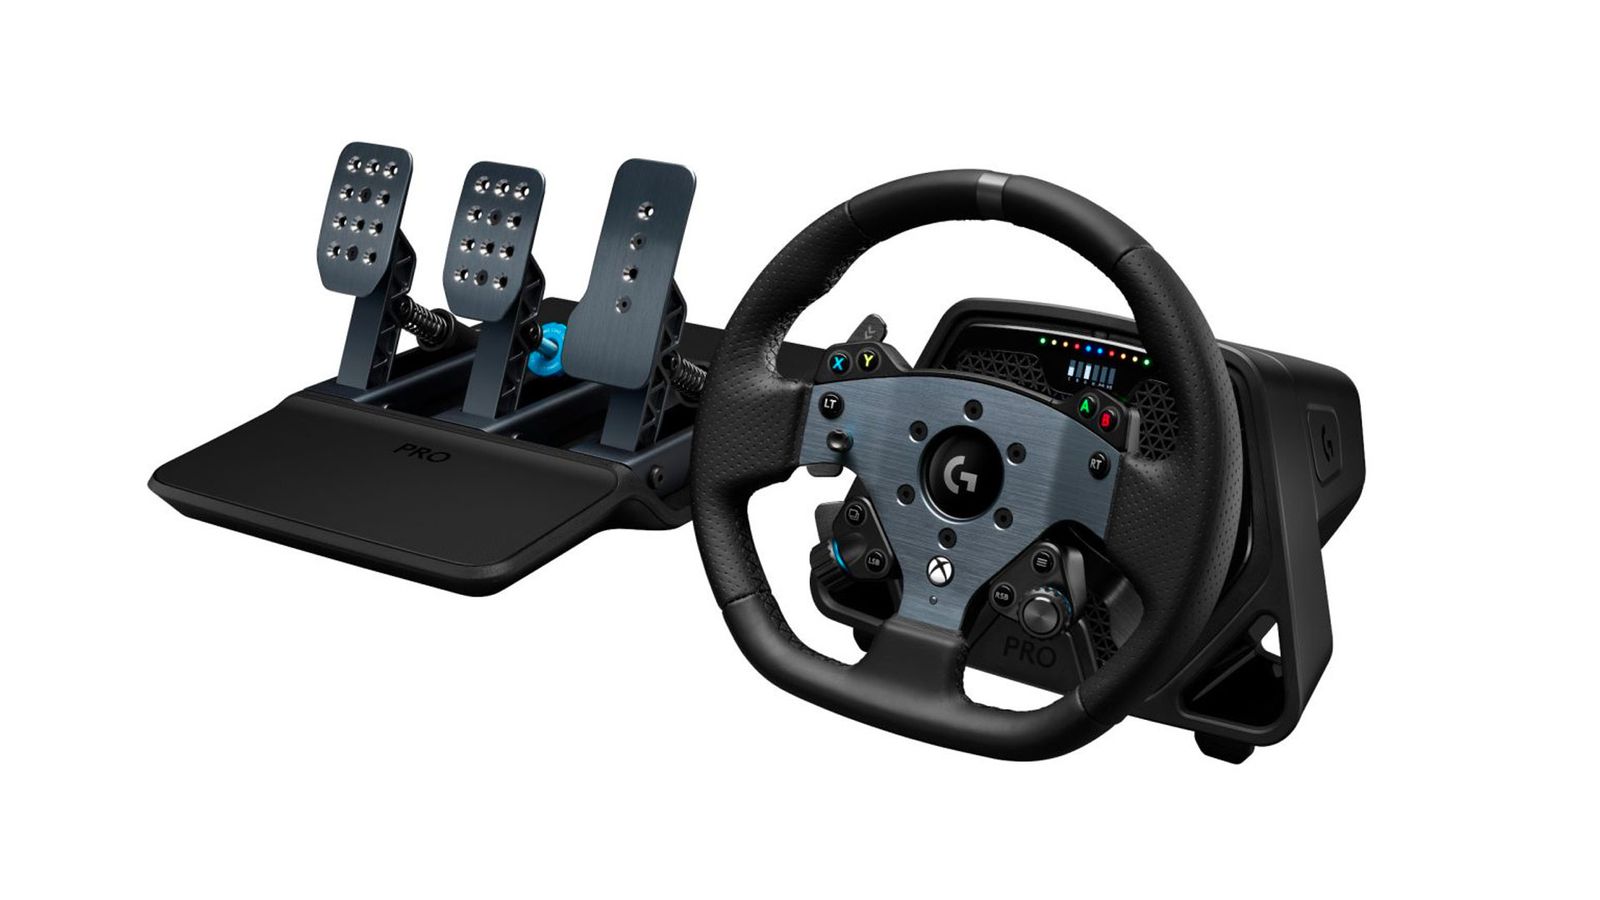 Logitech G PRO product image of a black racing wheel with a metal centre and pedals next.